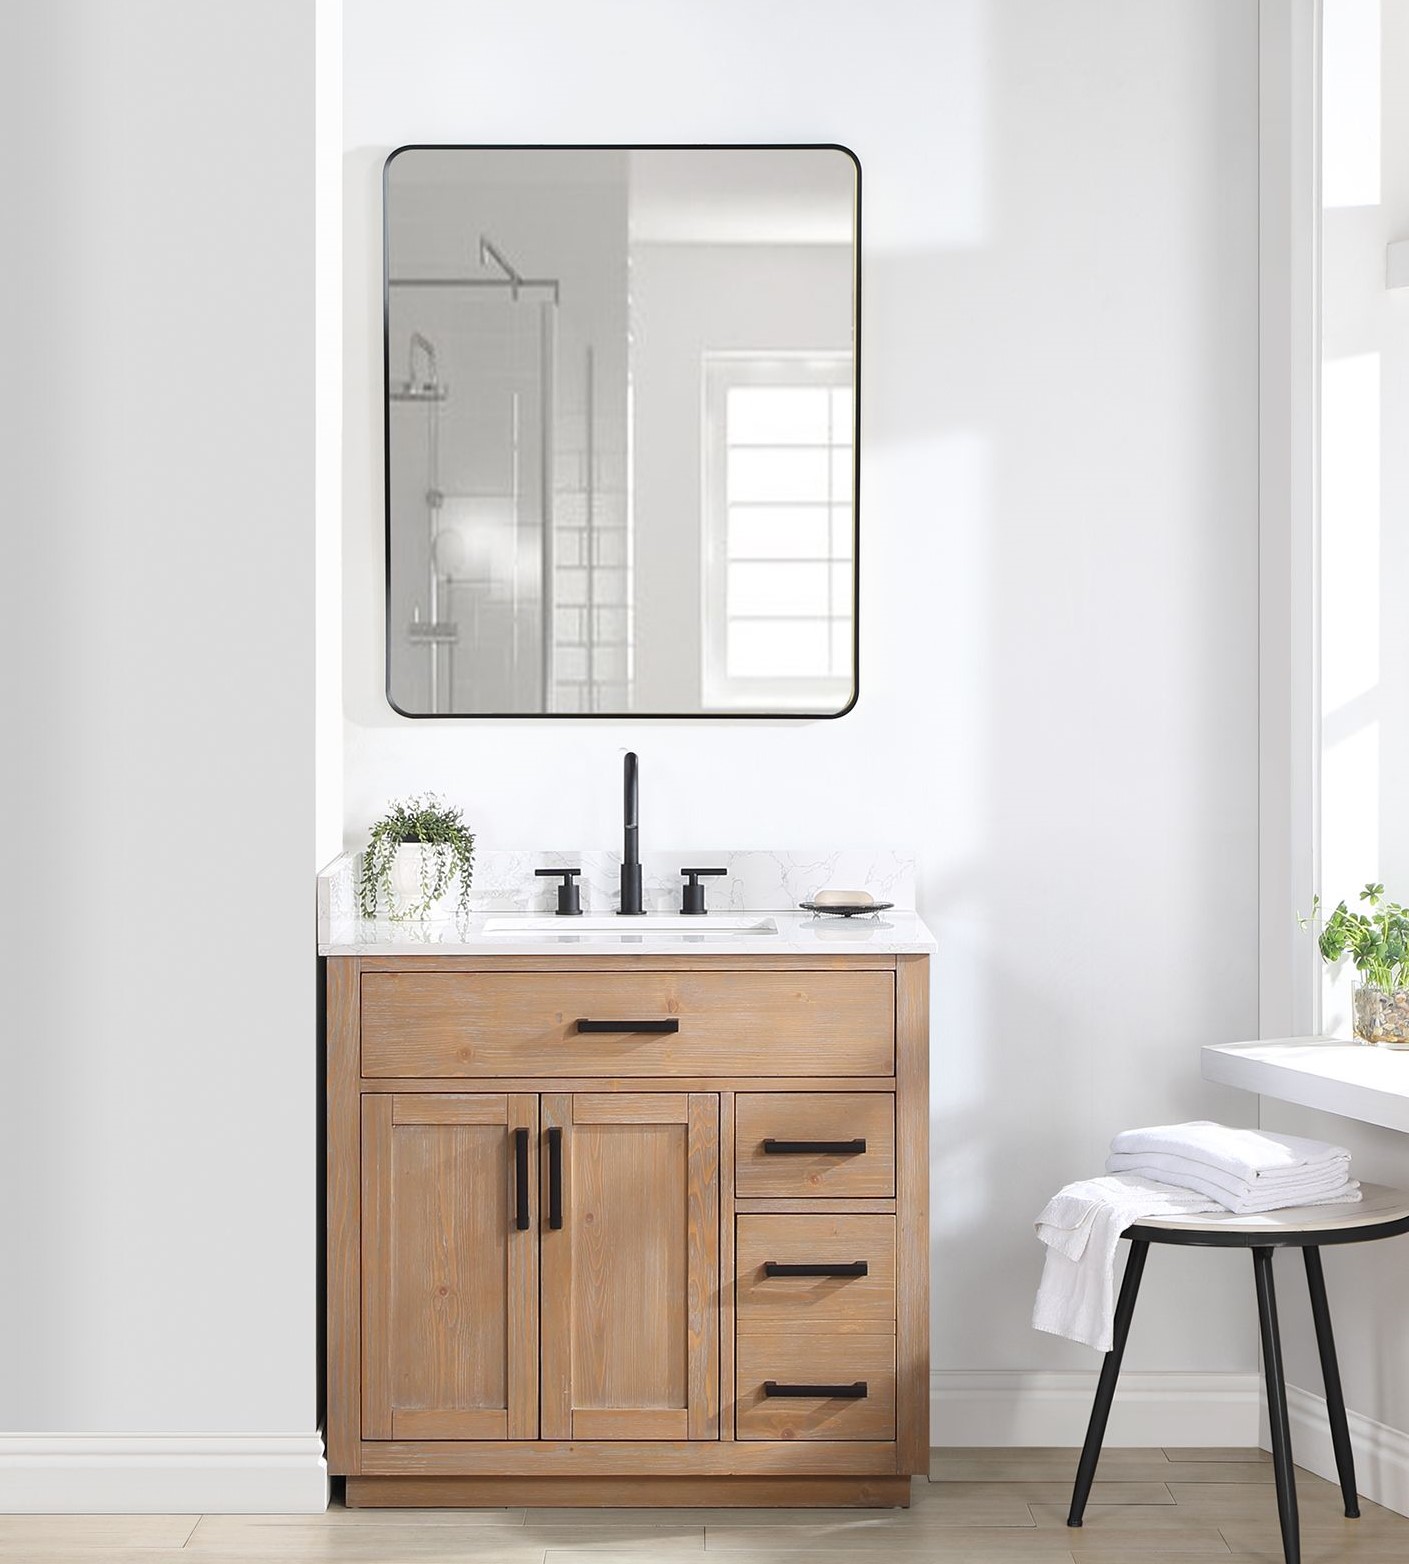 Issac Edwards 36" Single Bathroom Vanity in Light Brown with Grain White Composite Stone Countertop with Mirror